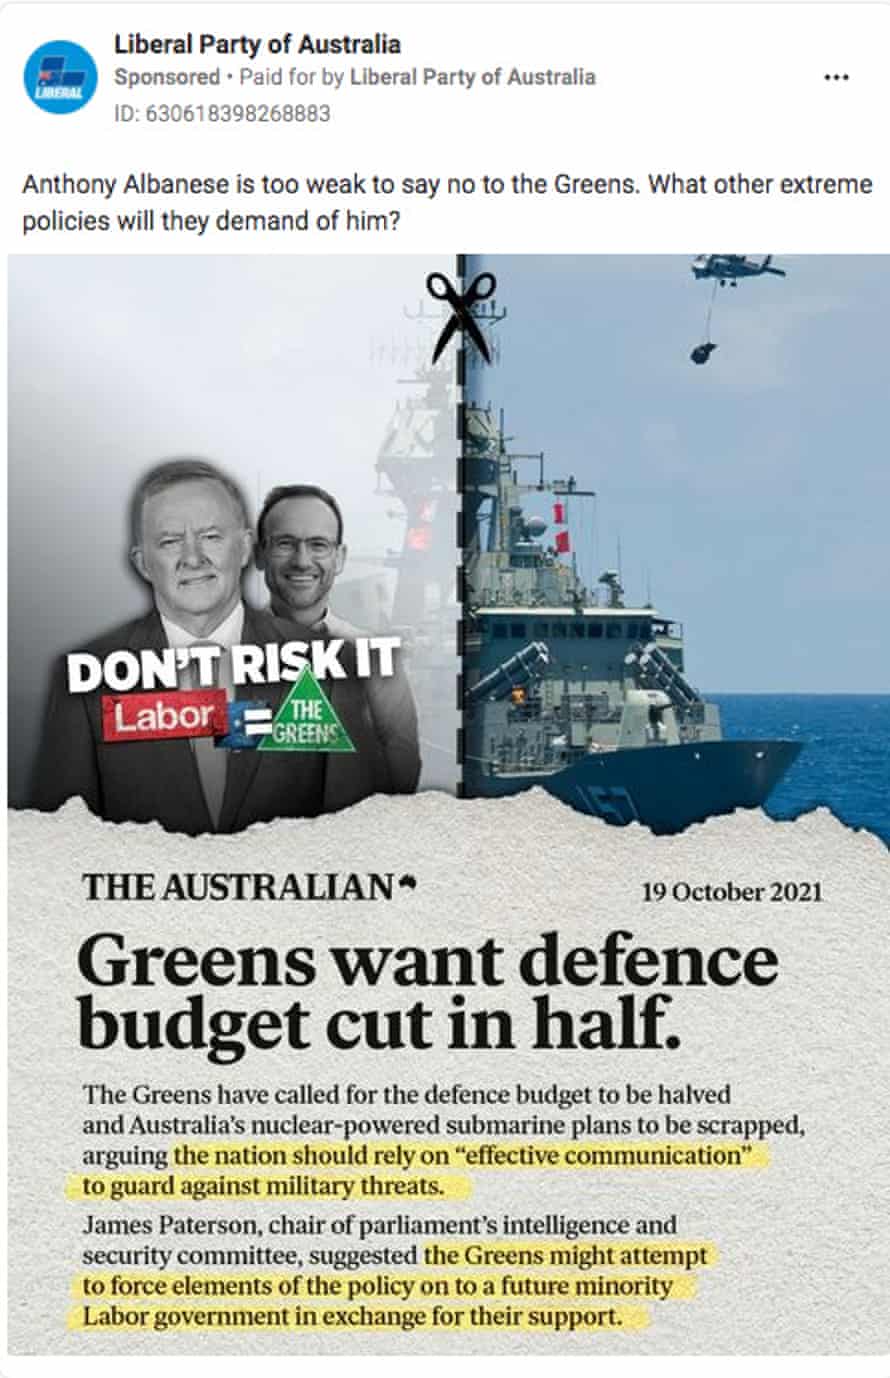 Liberal party ads running on Facebook claiming a Labor-Green coalition would cut defence spending